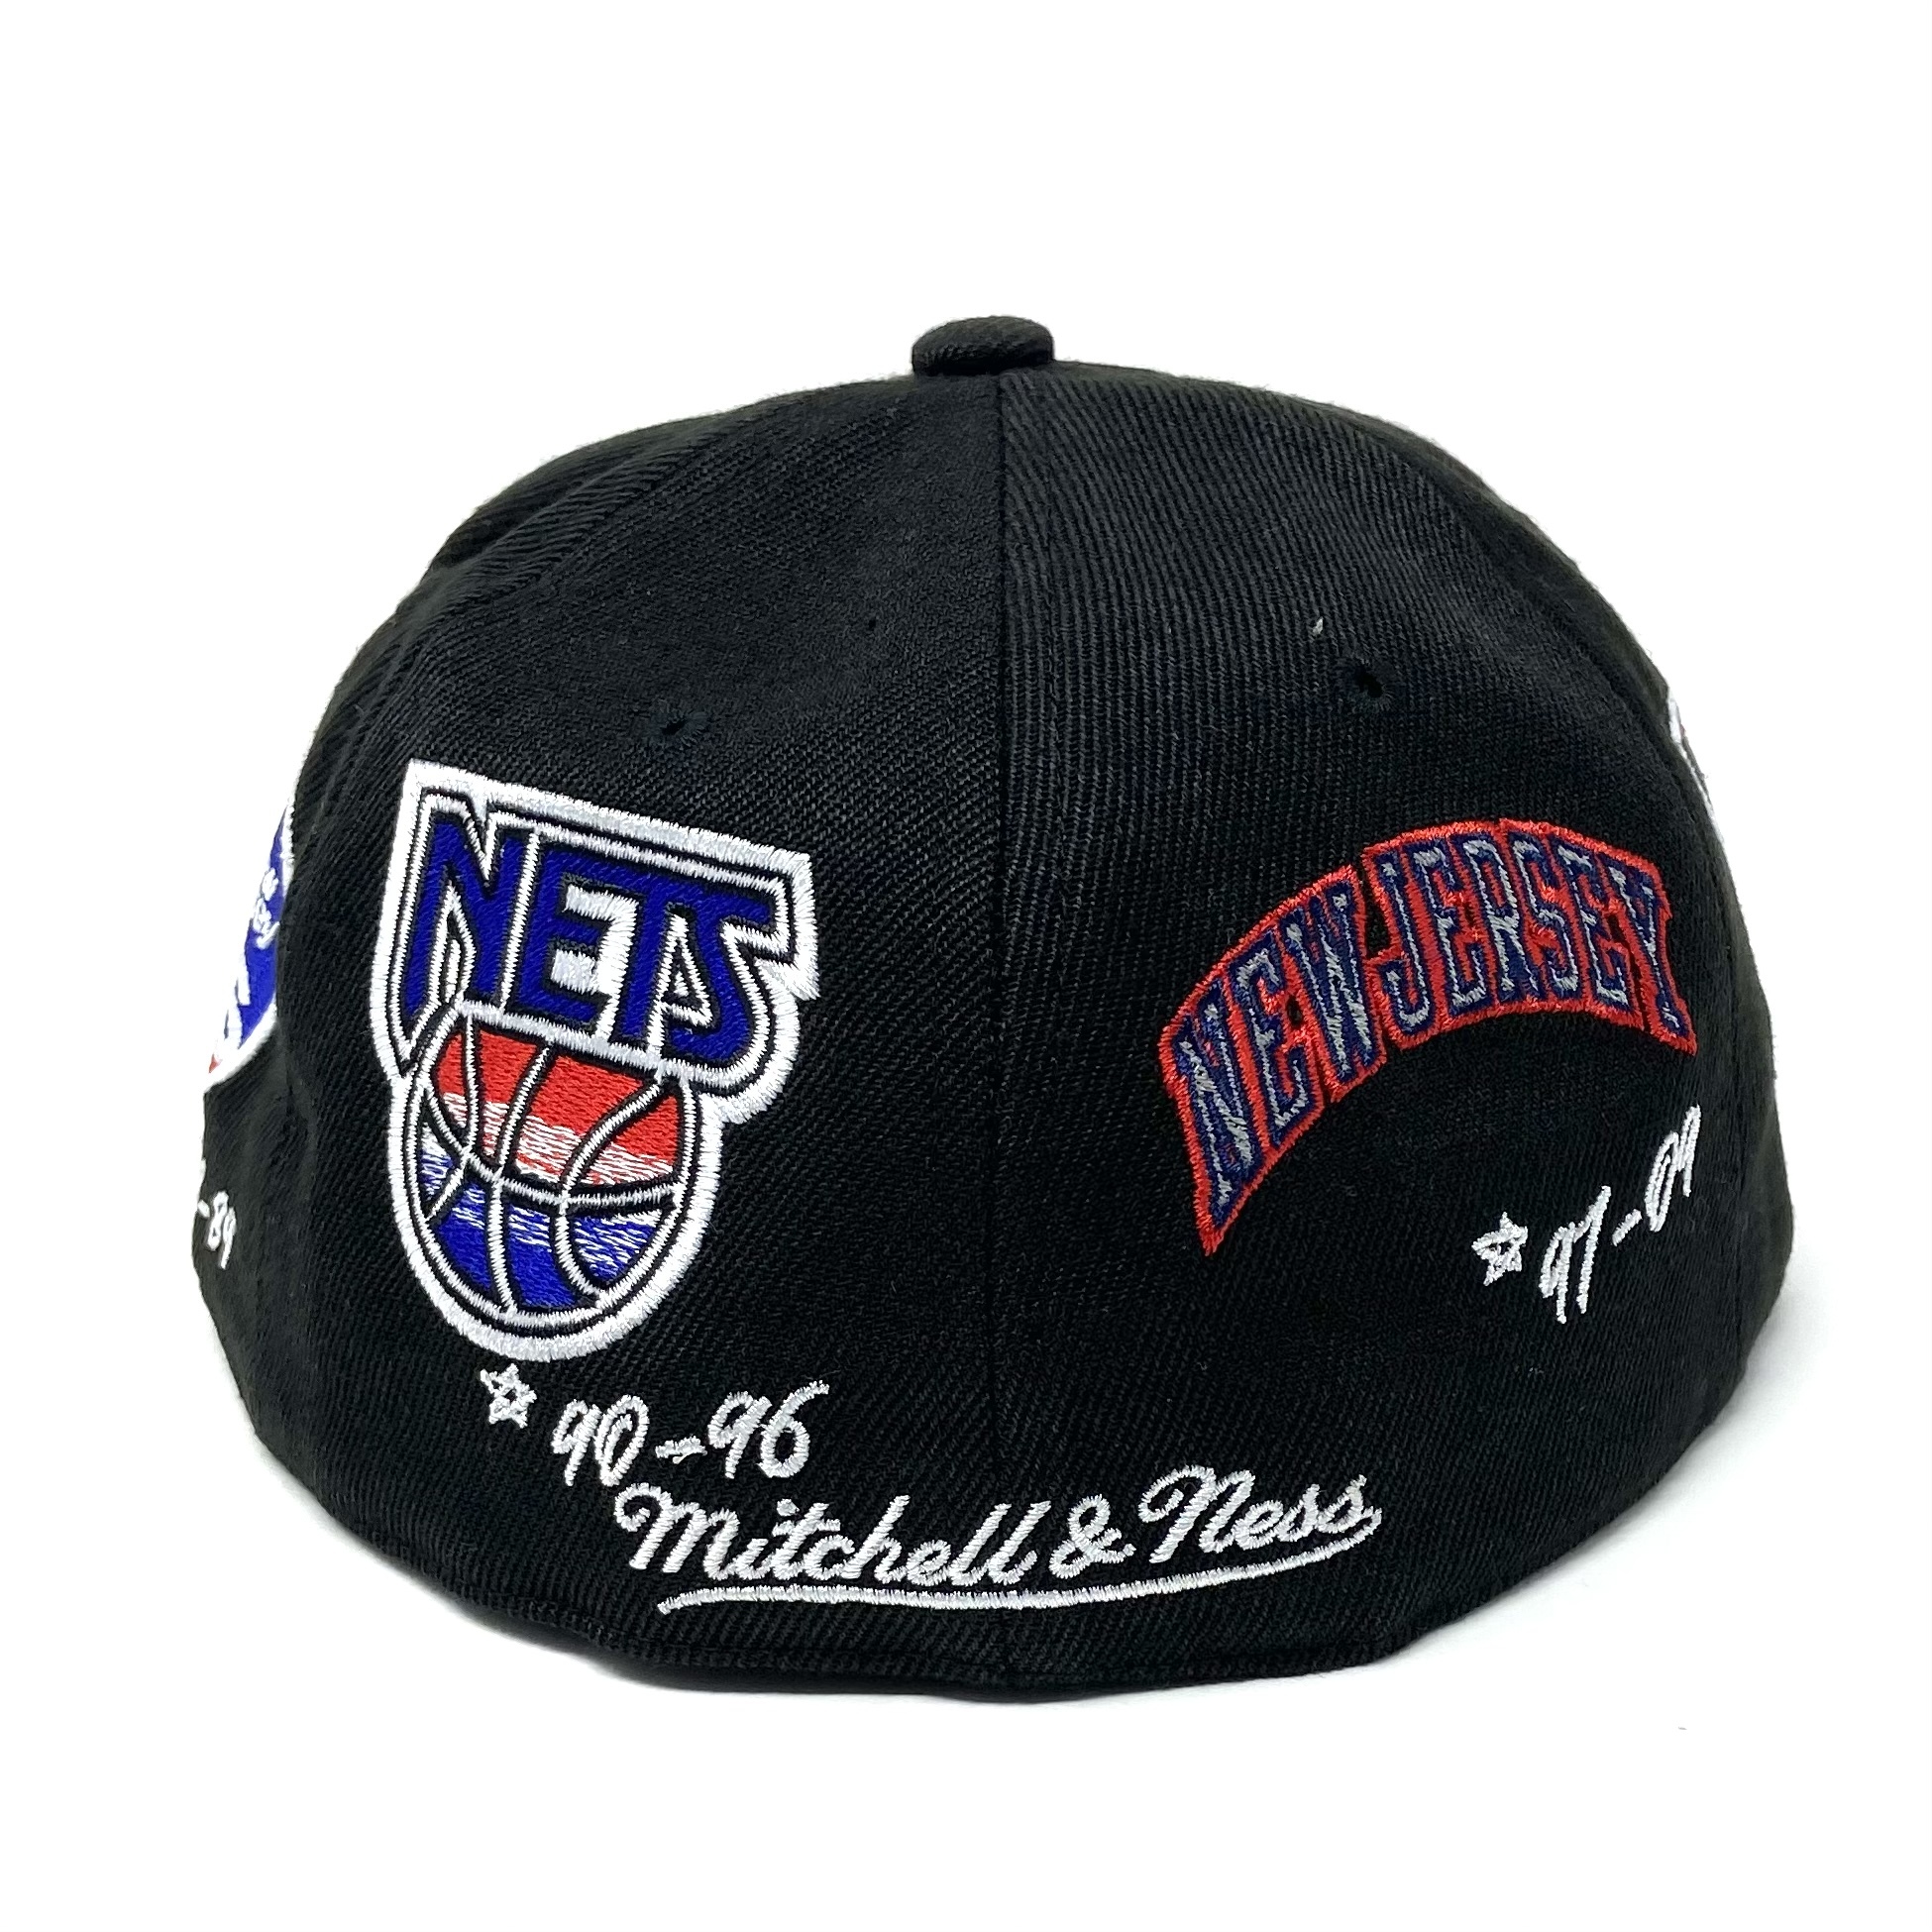 Mitchell & Ness New Jersey Nets Vintage DYNASTY Fitted Cap Hat Size 8  NEW